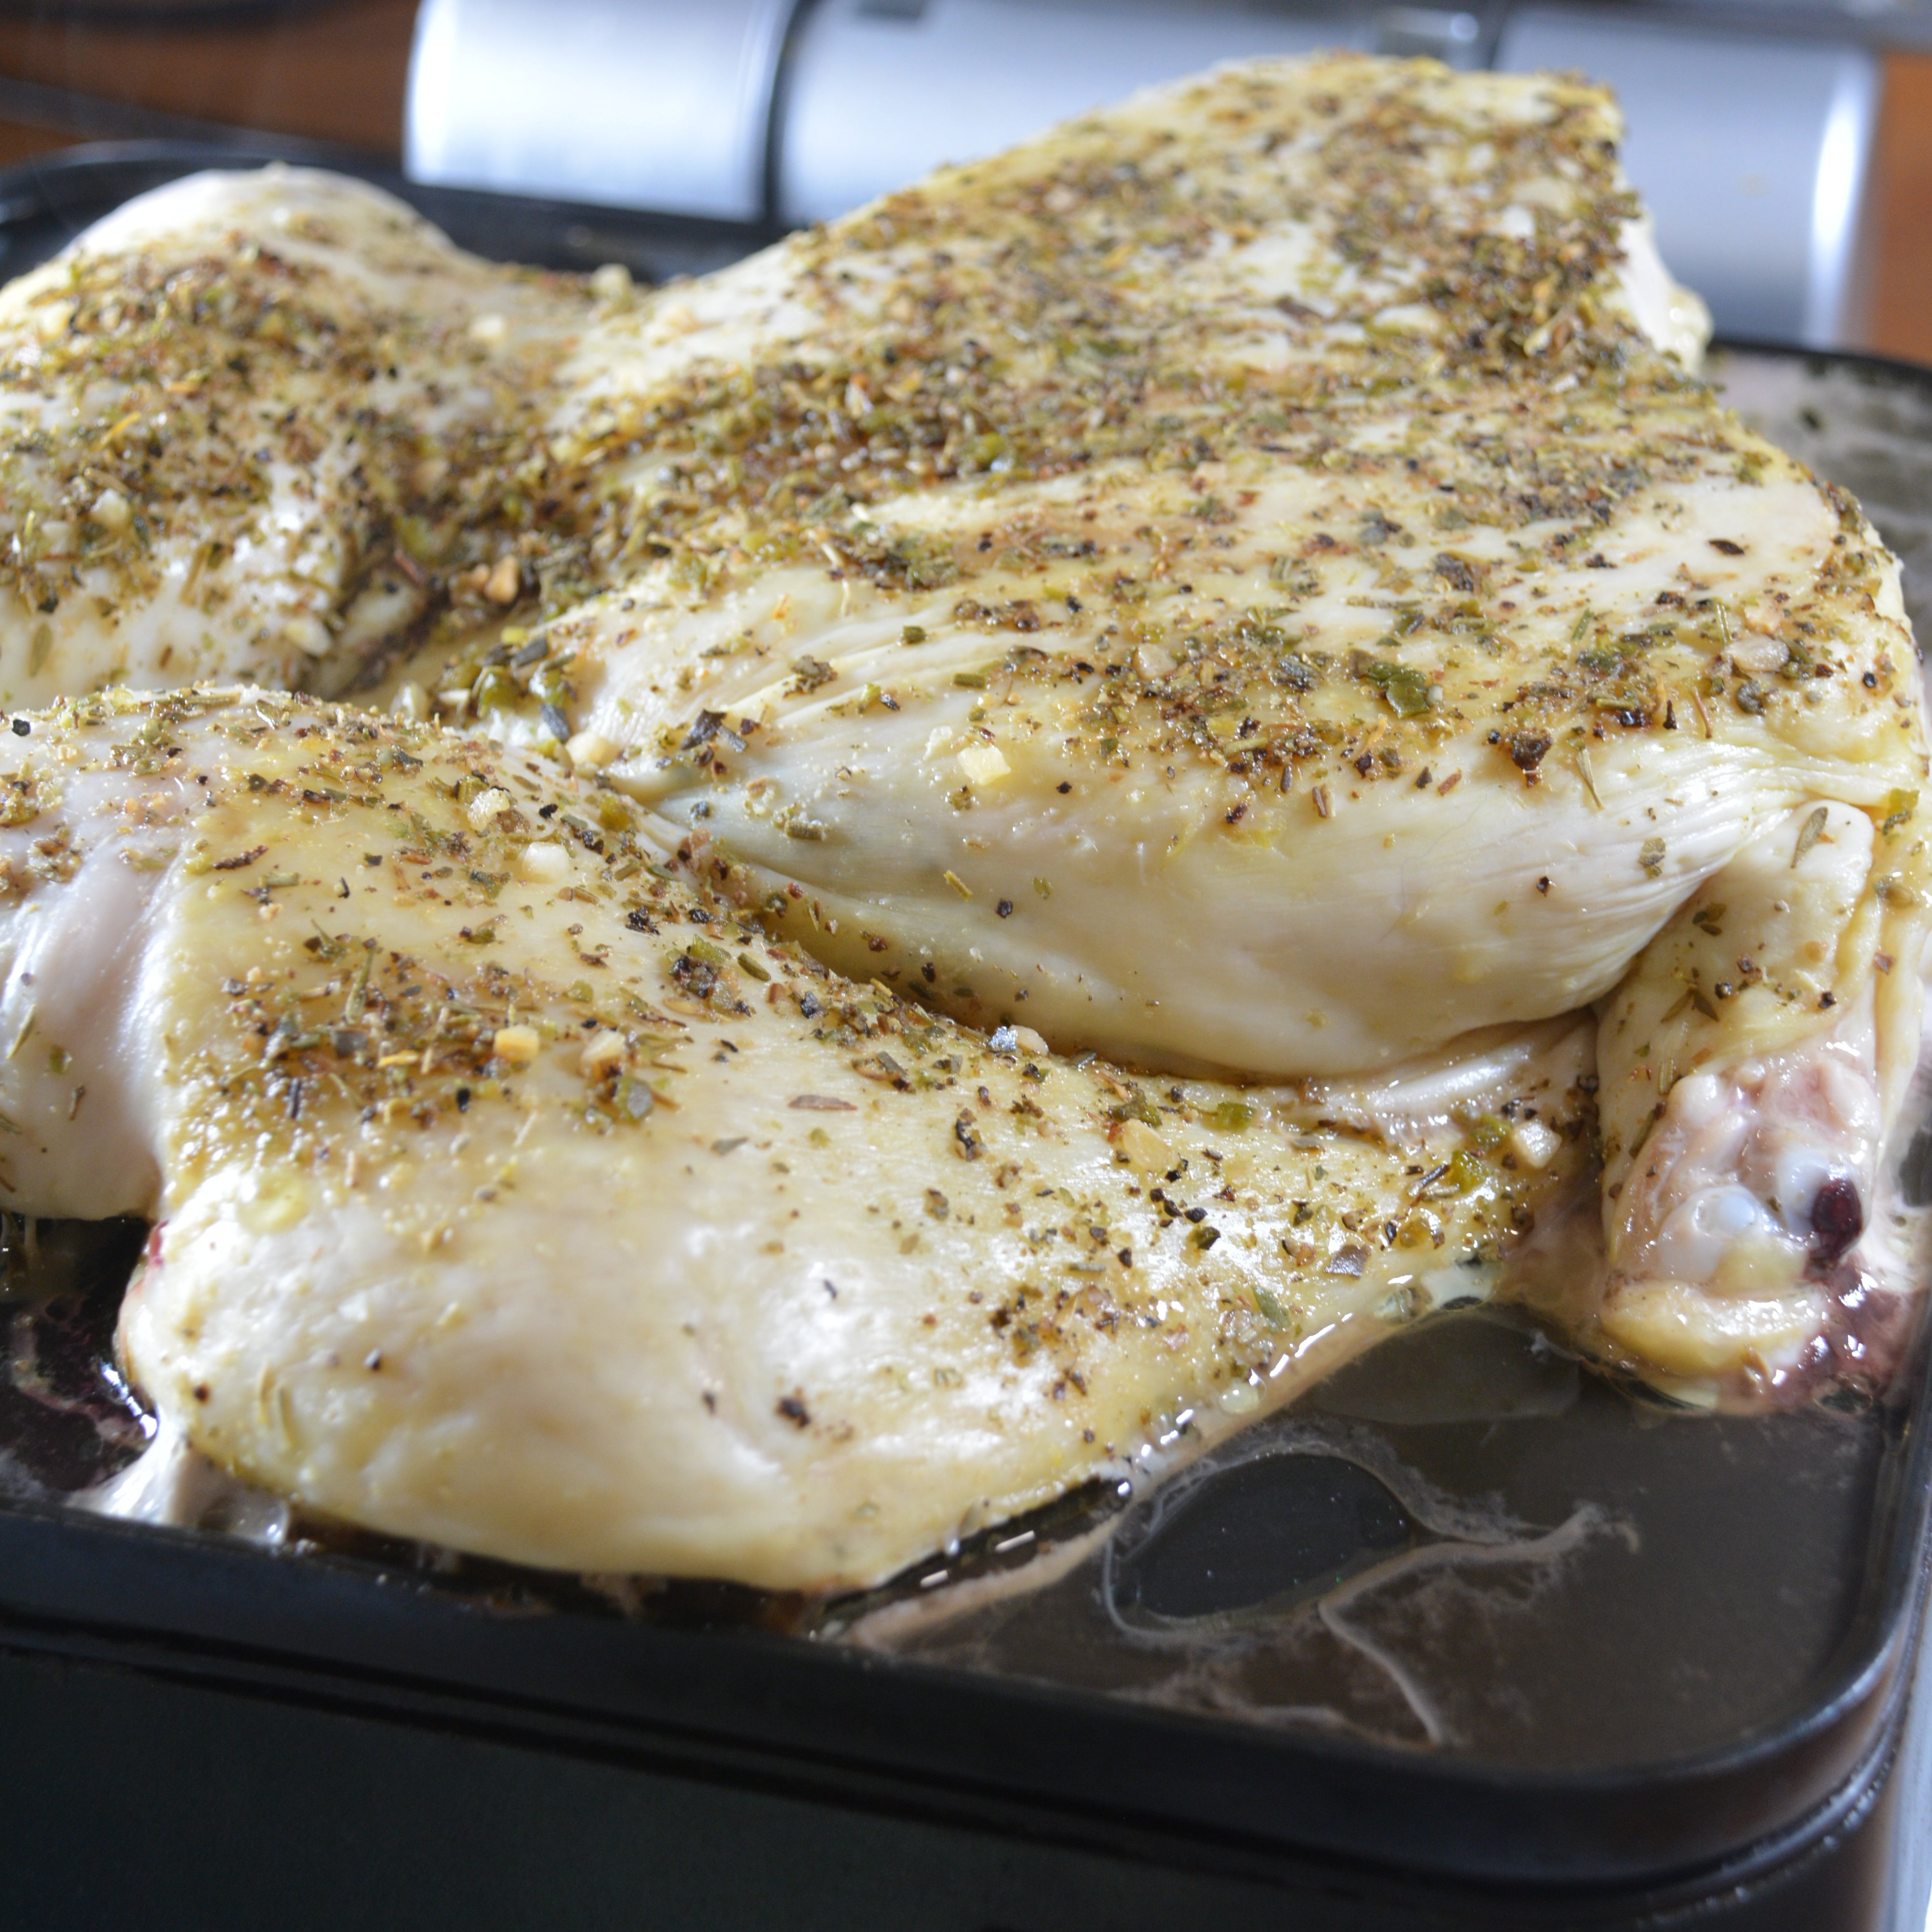 Herb & Garlic Chicken cooked on cinder grill indoor precision grill